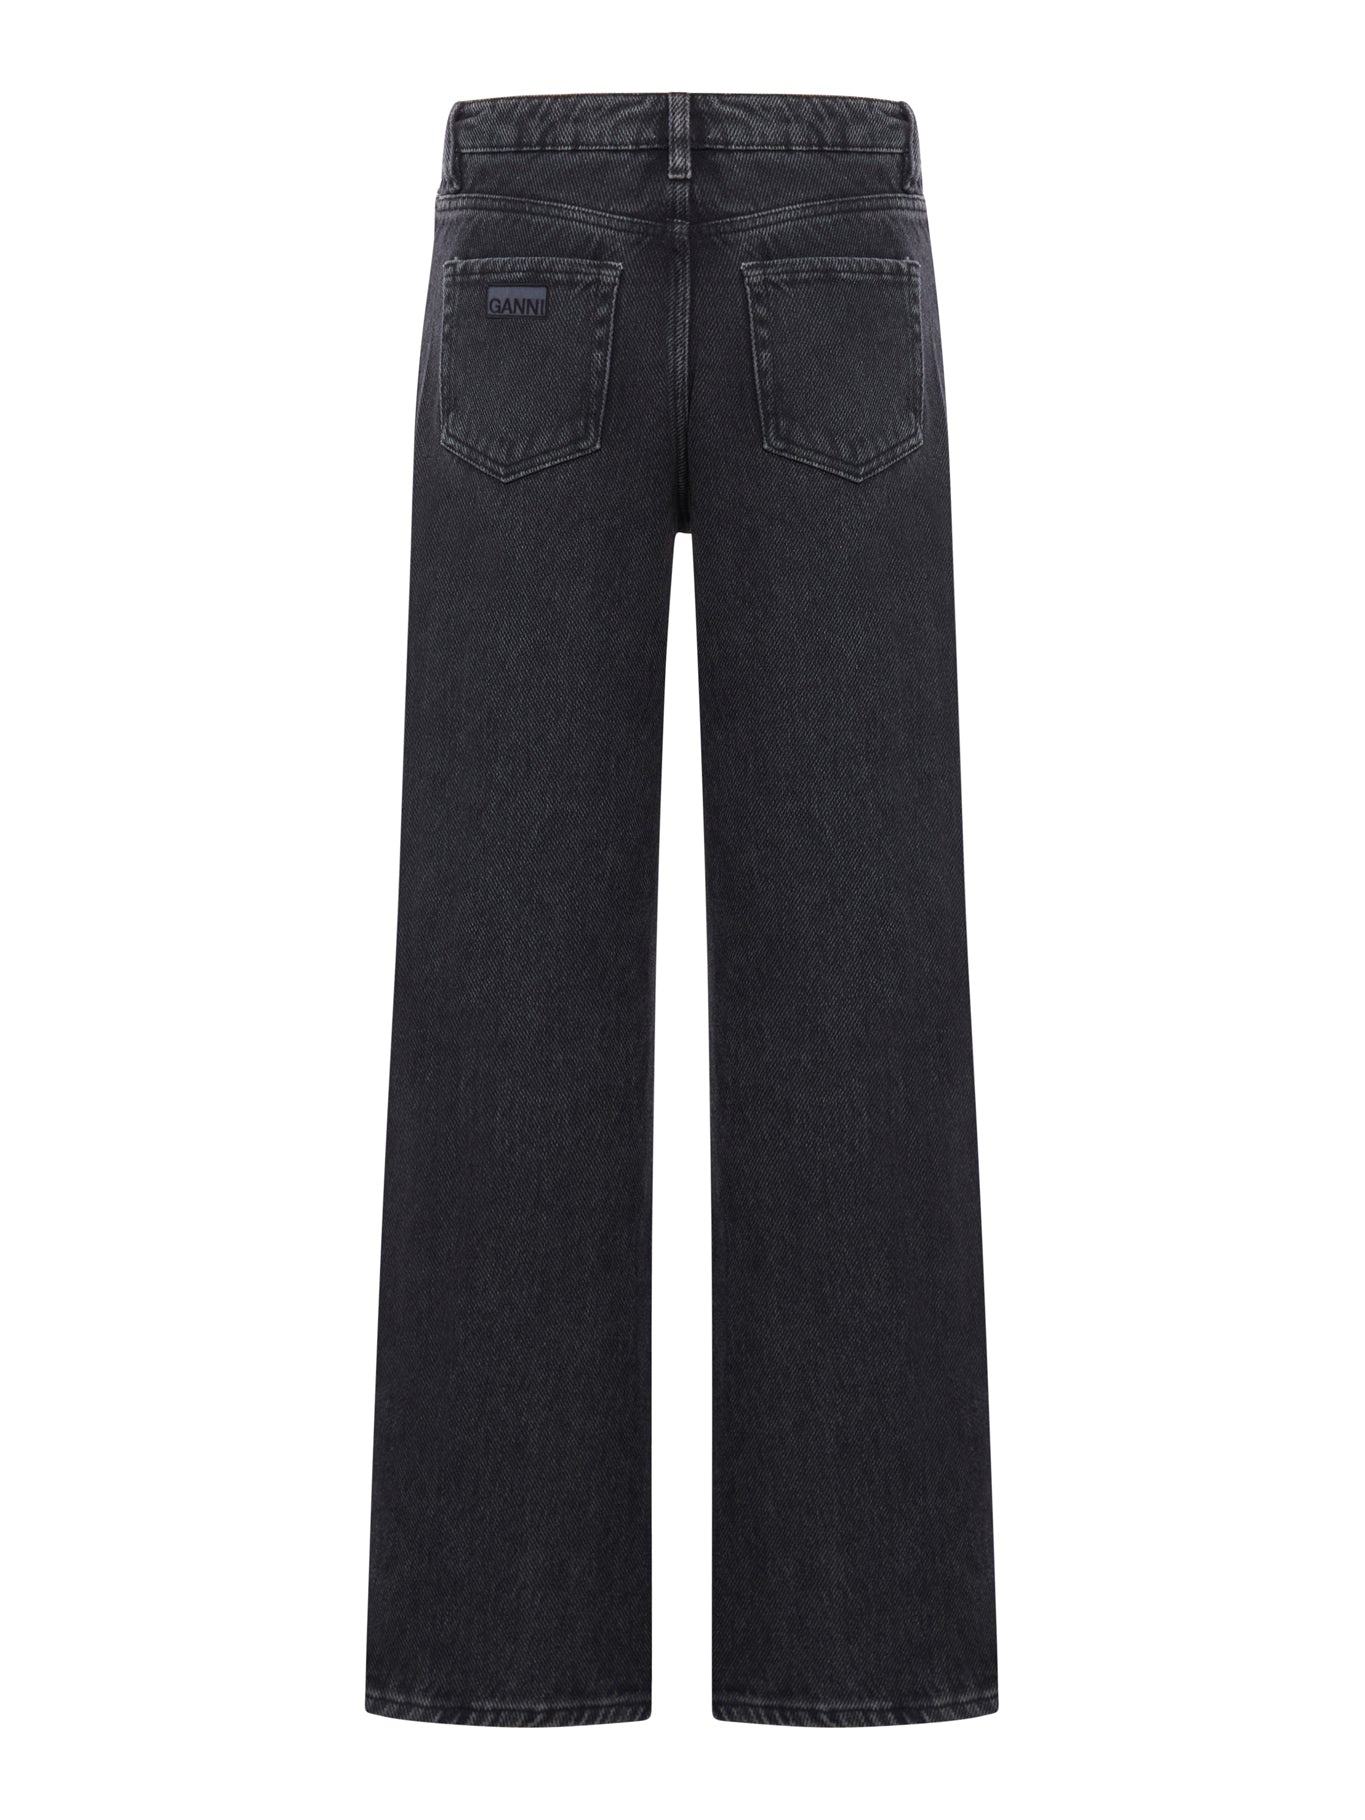 Pockets High-Waisted Wide-Leg Jeans in Black